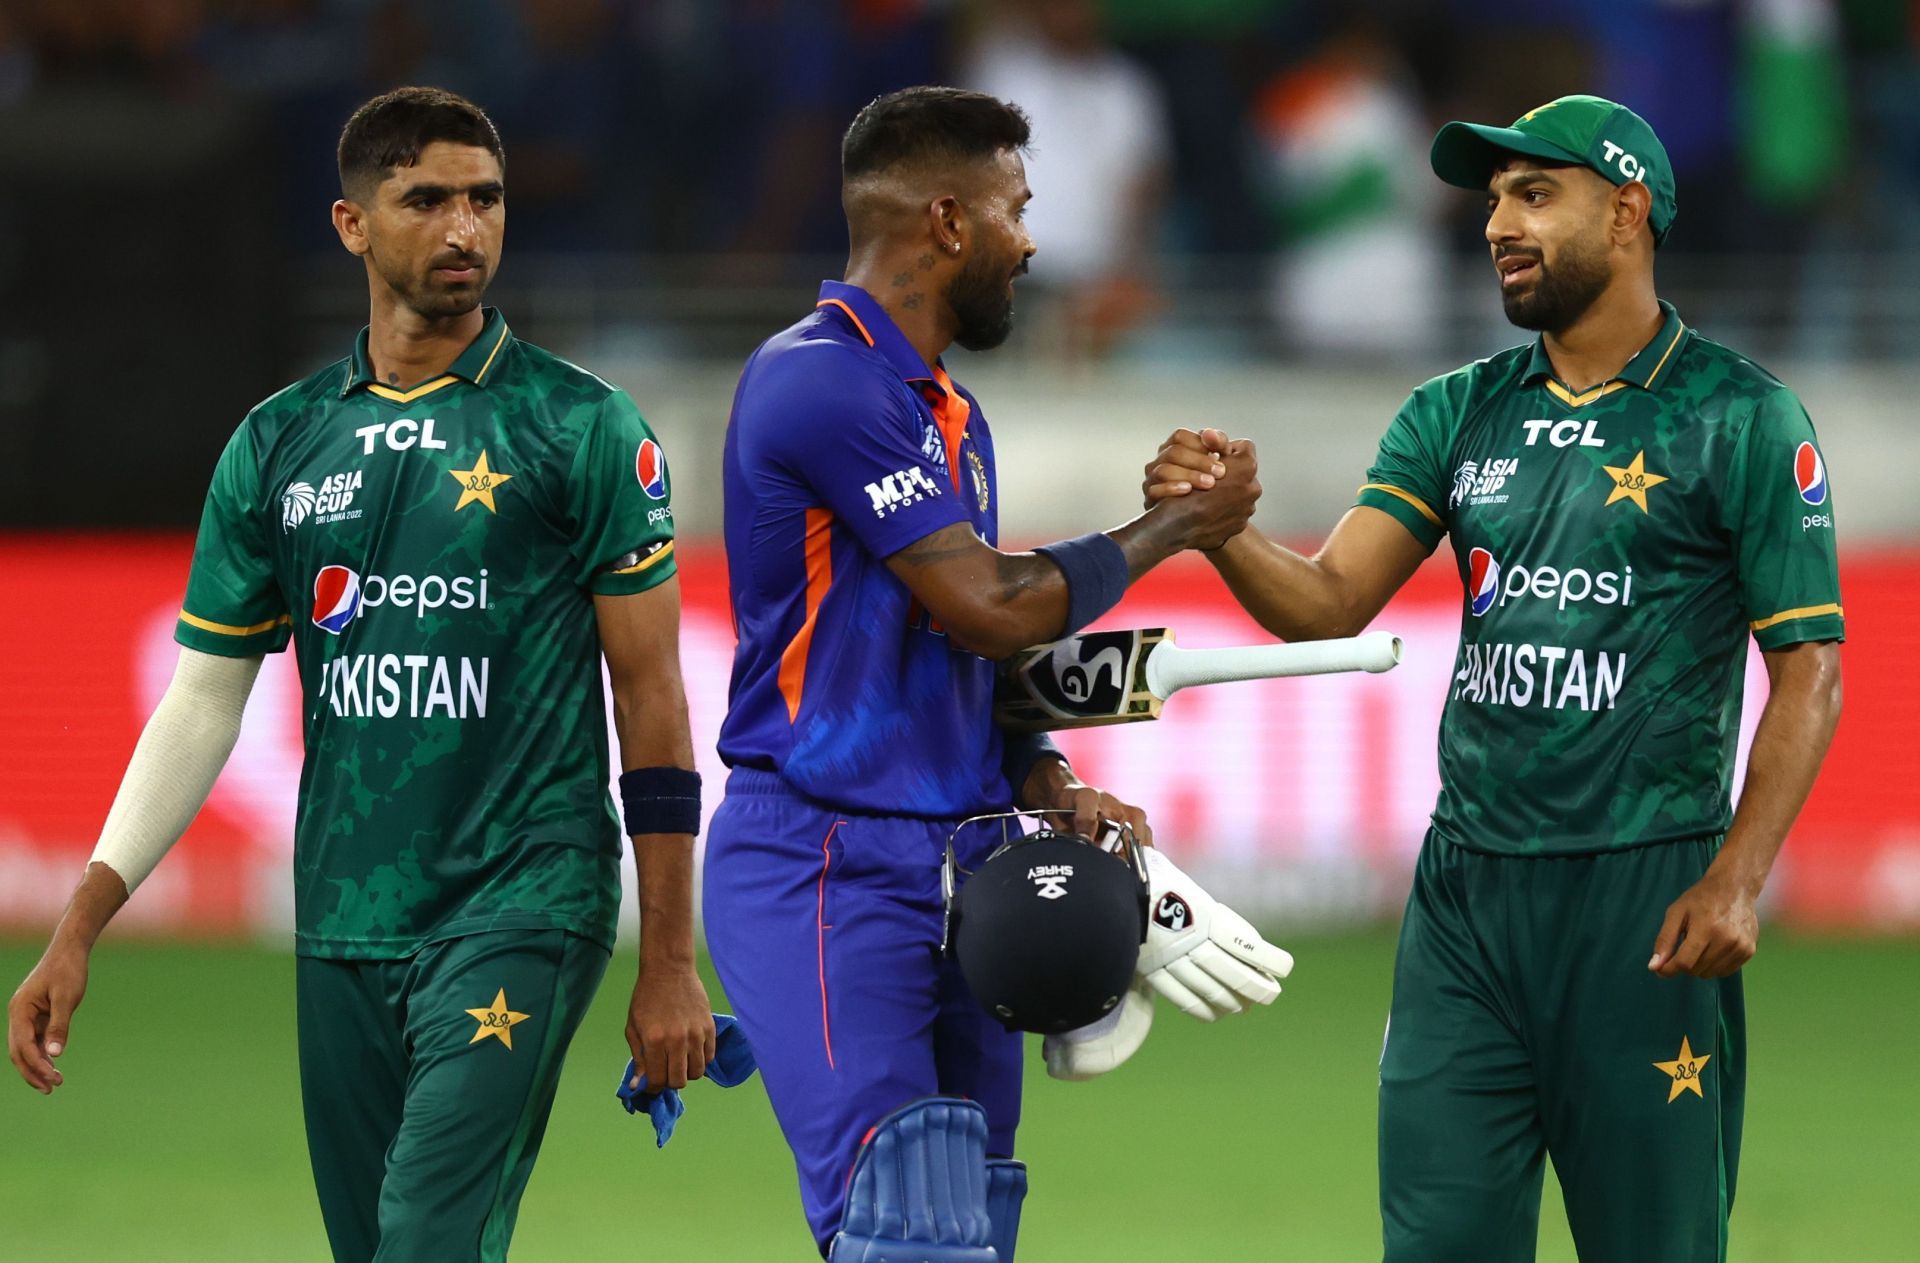 The storied India-Pakistan rivalry lived up to its hype